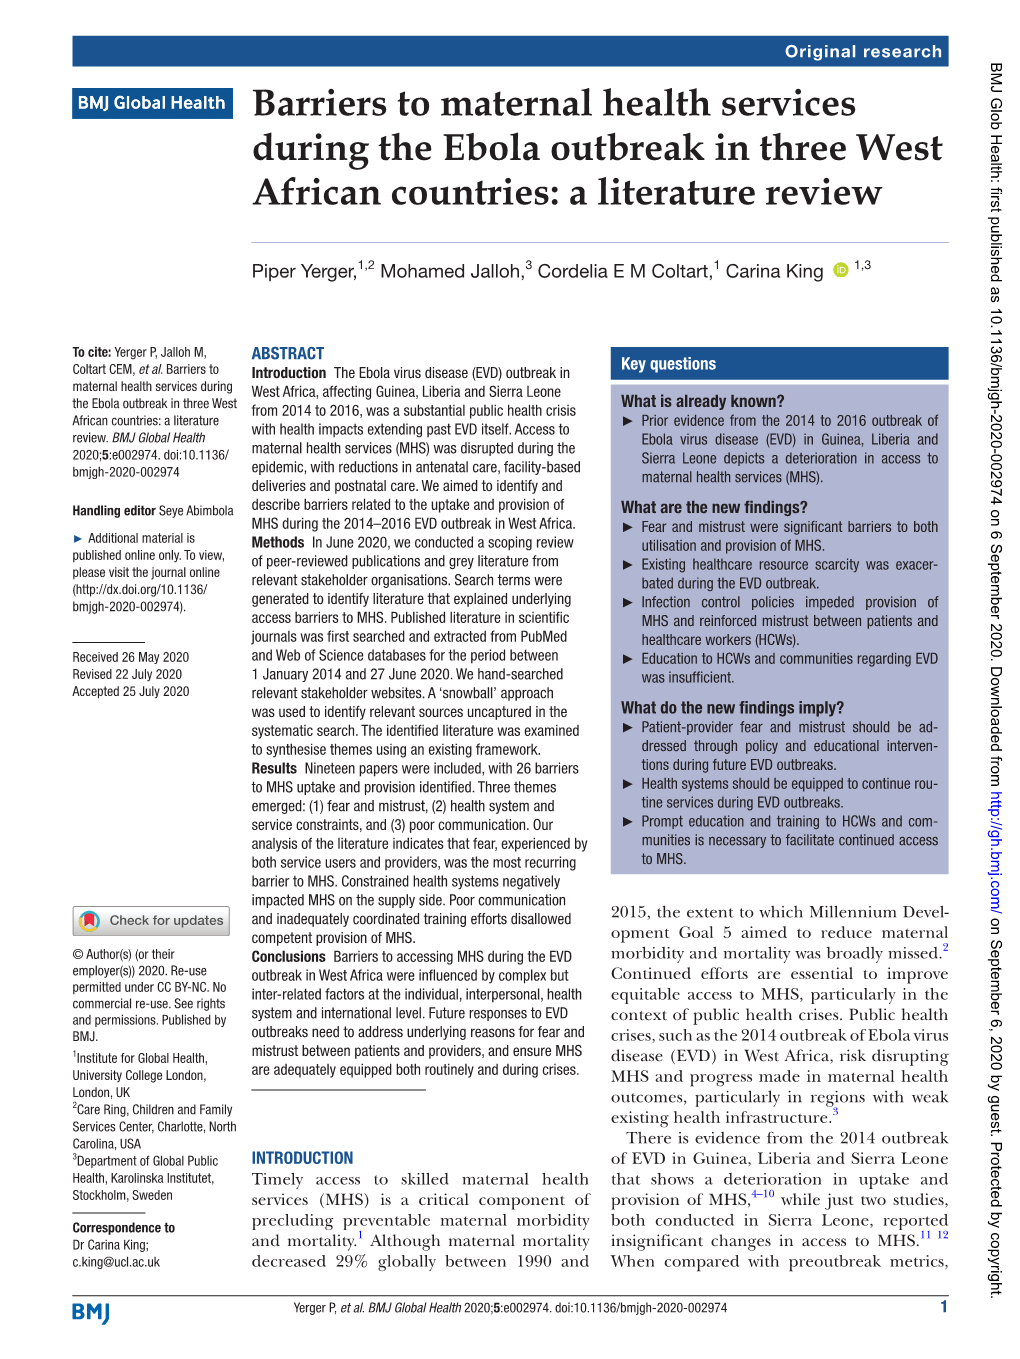 Barriers to Maternal Health Services During the Ebola Outbreak in Three West African Countries: a Literature Review